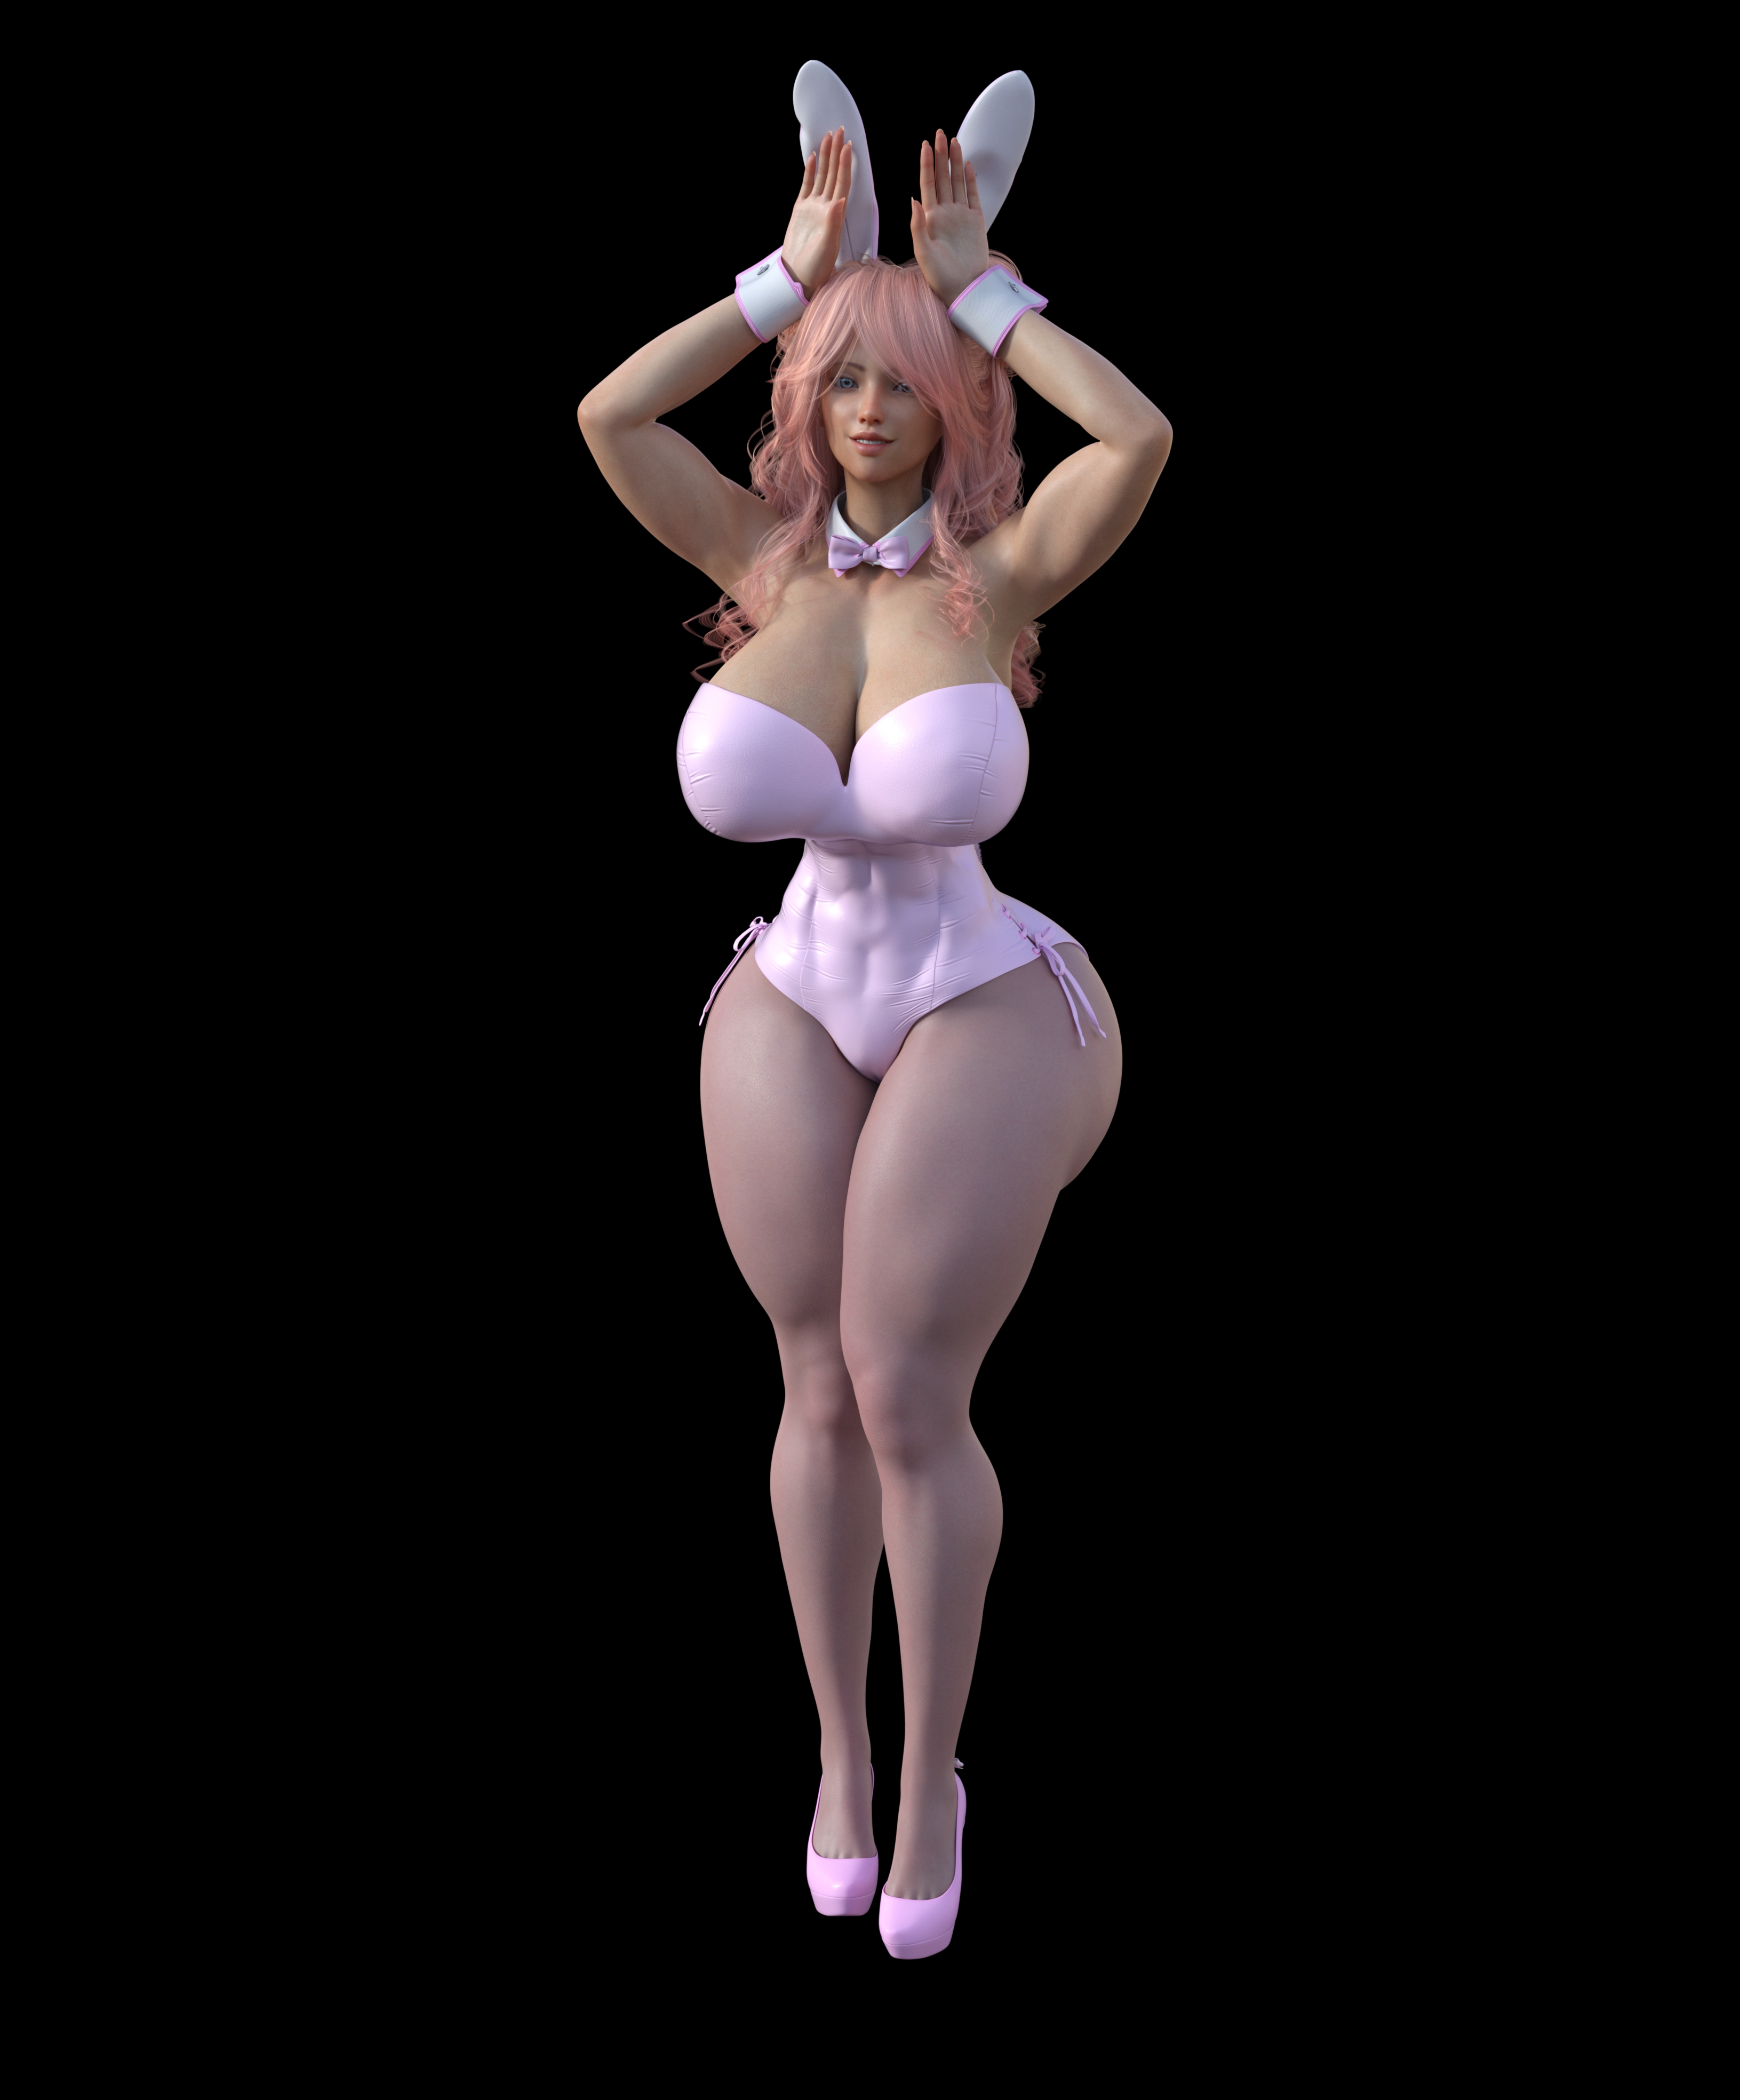 Rit In A Bunny Suit  Bunny Suit Bunny Ears Clothed High Heels Female